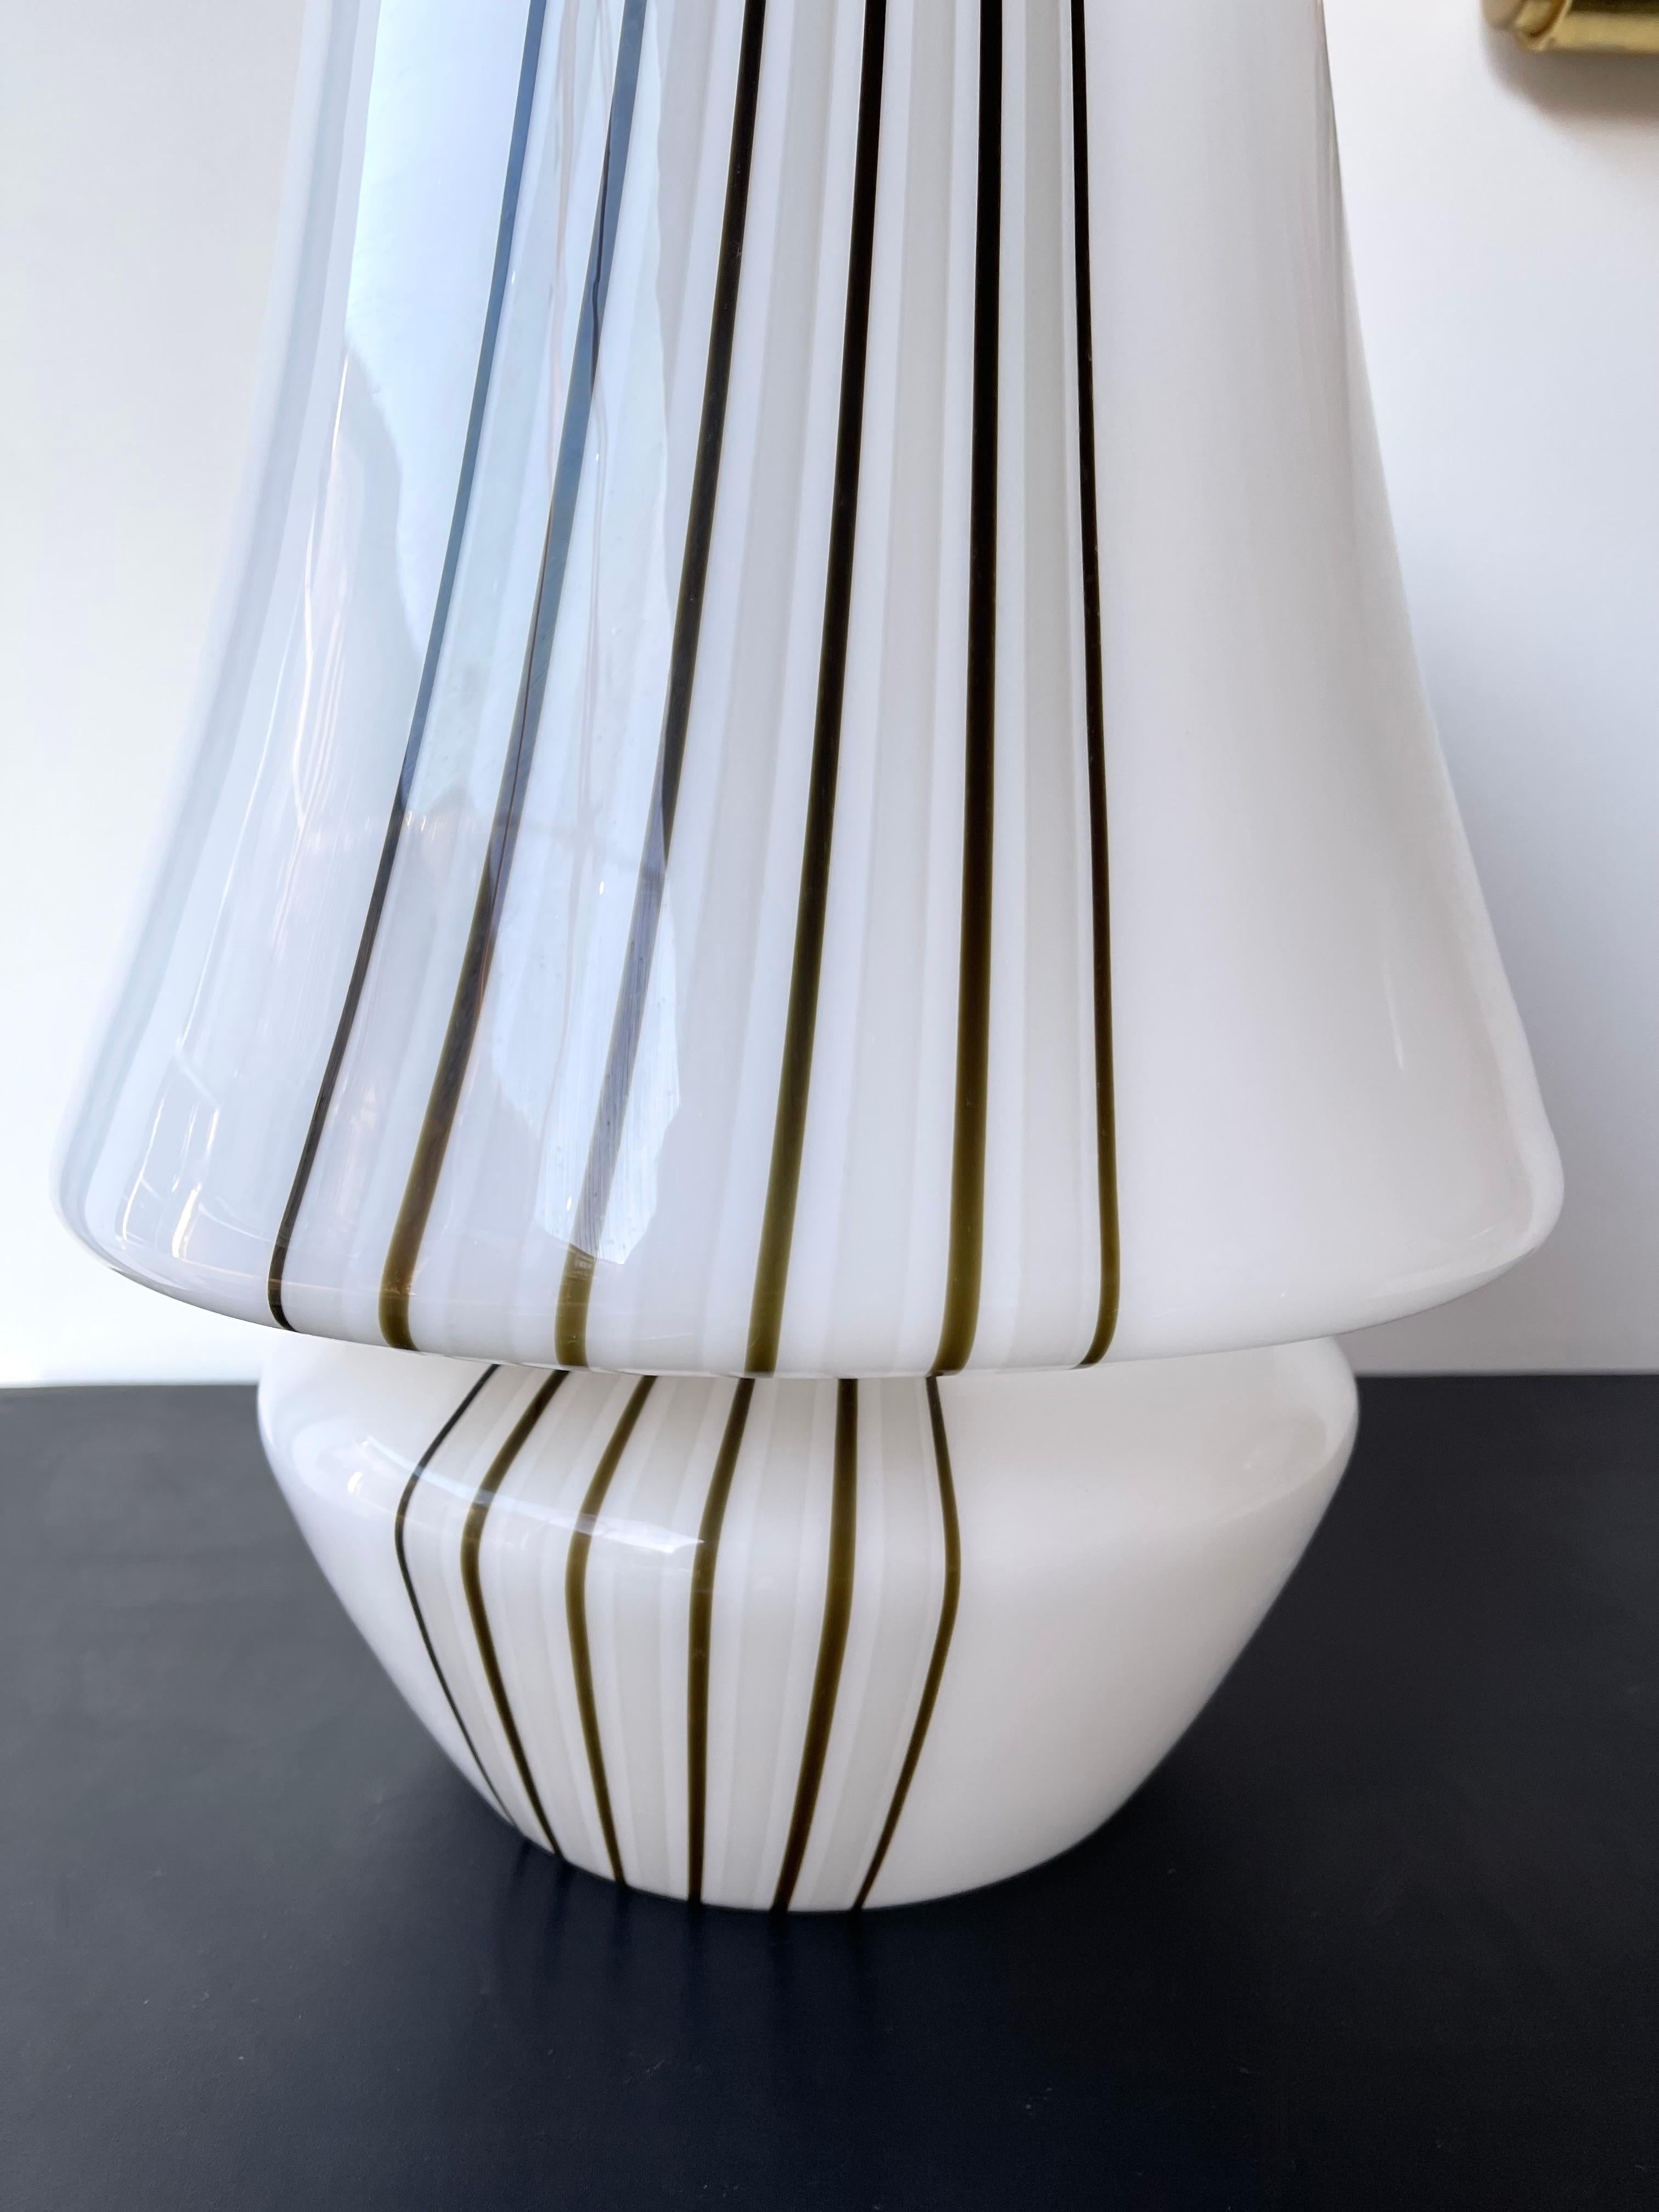 Pair of Large Stripe Murano Glass Lamps, Italy, 1970s For Sale 5